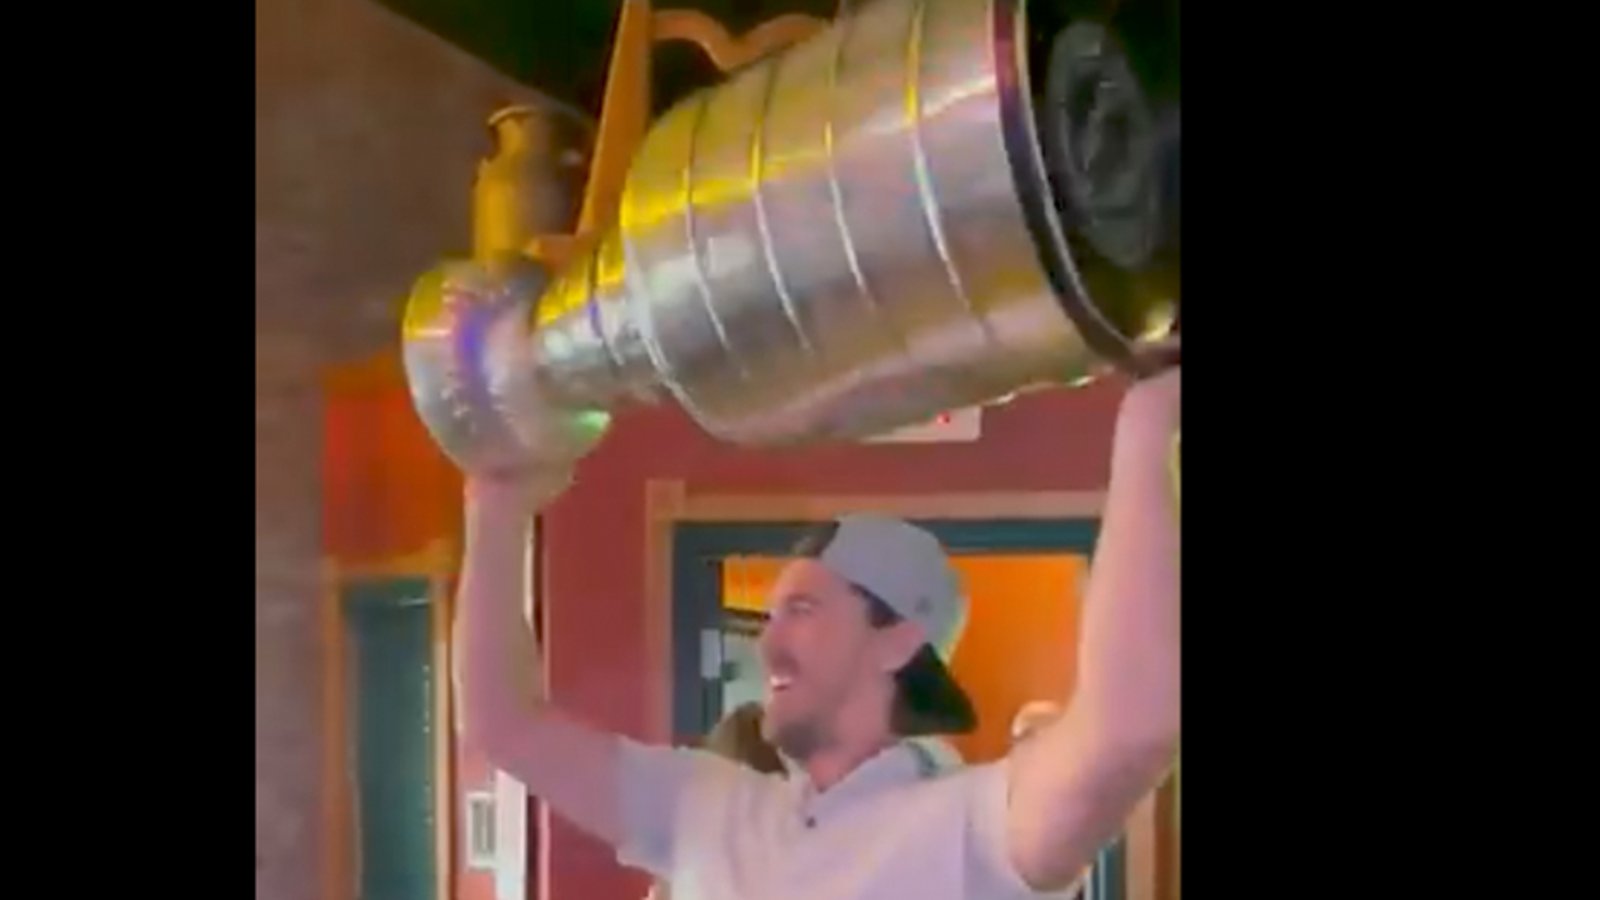 Ryan McDonaugh celebrates Stanley Cup victory with an entrance fit for a king [VIDEO]